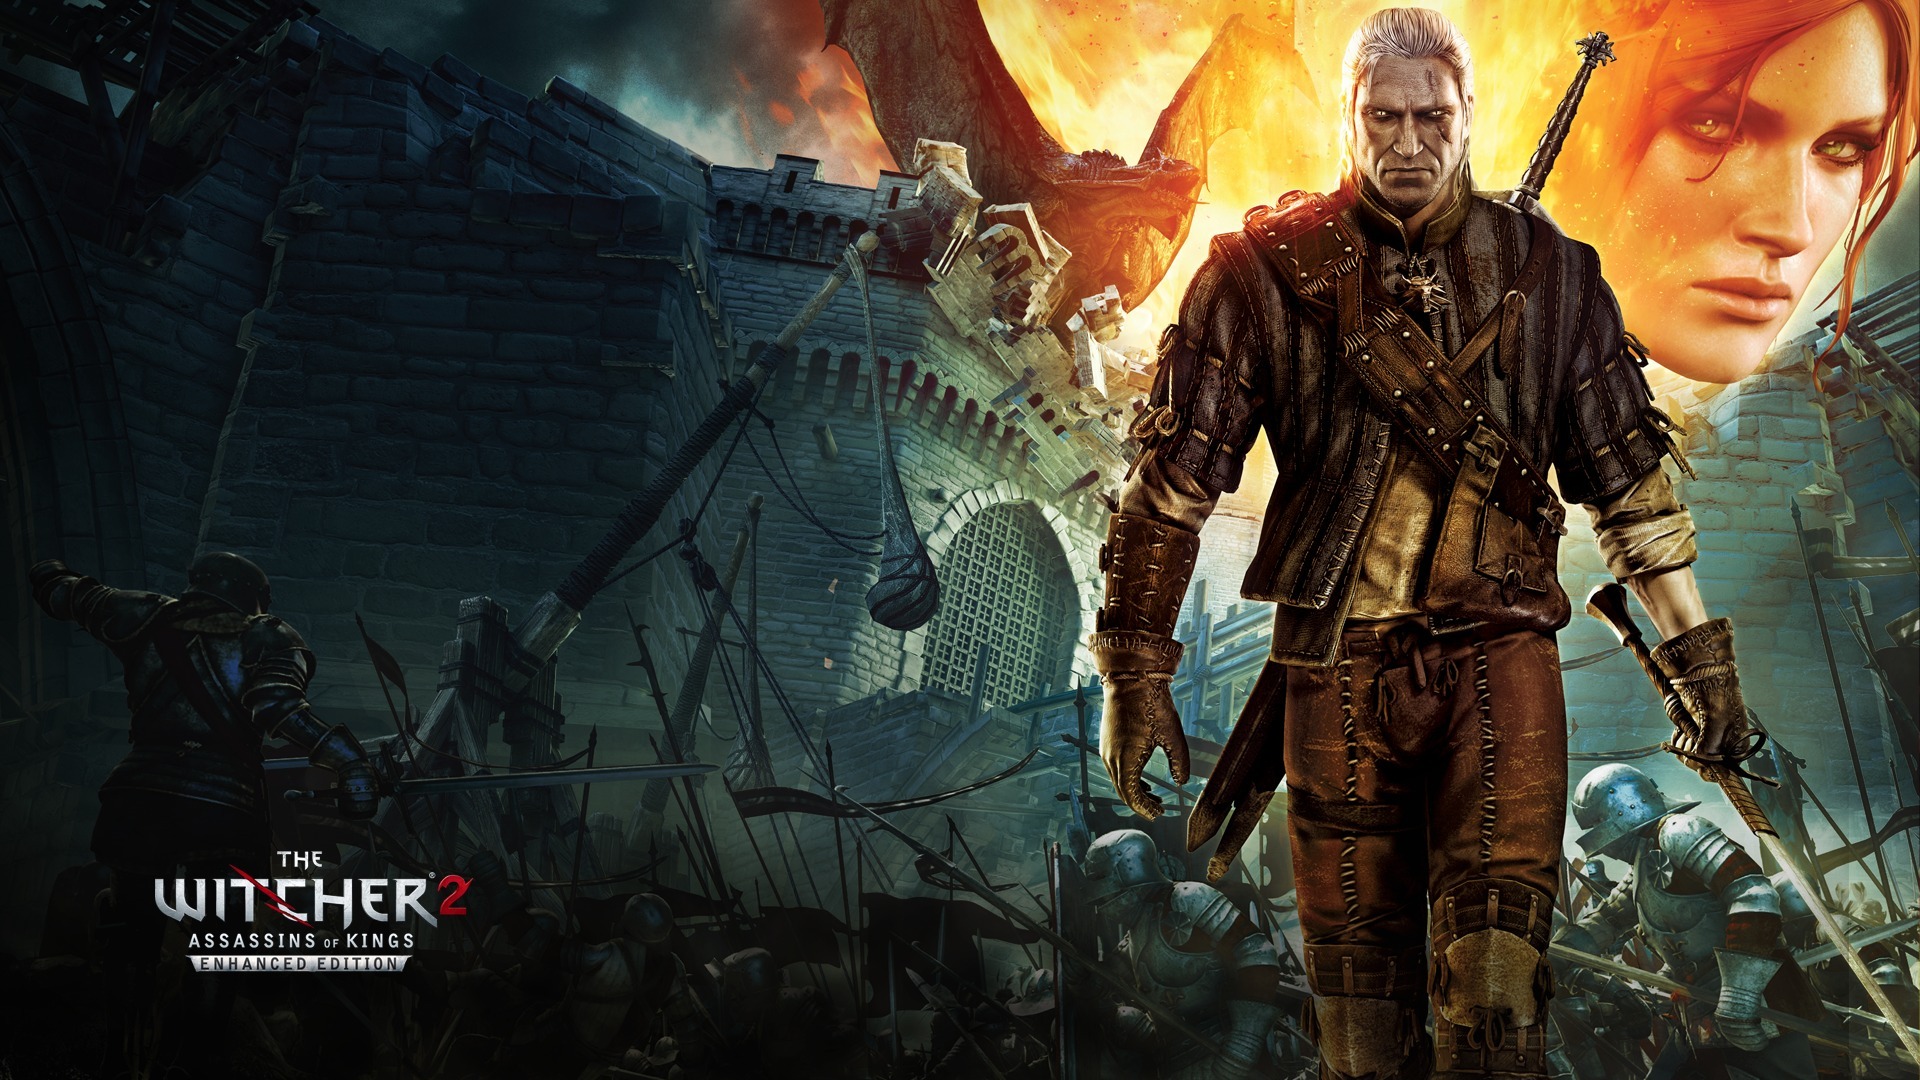 High Resolution Wallpaper | The Witcher 2: Assassins Of Kings 1920x1080 px